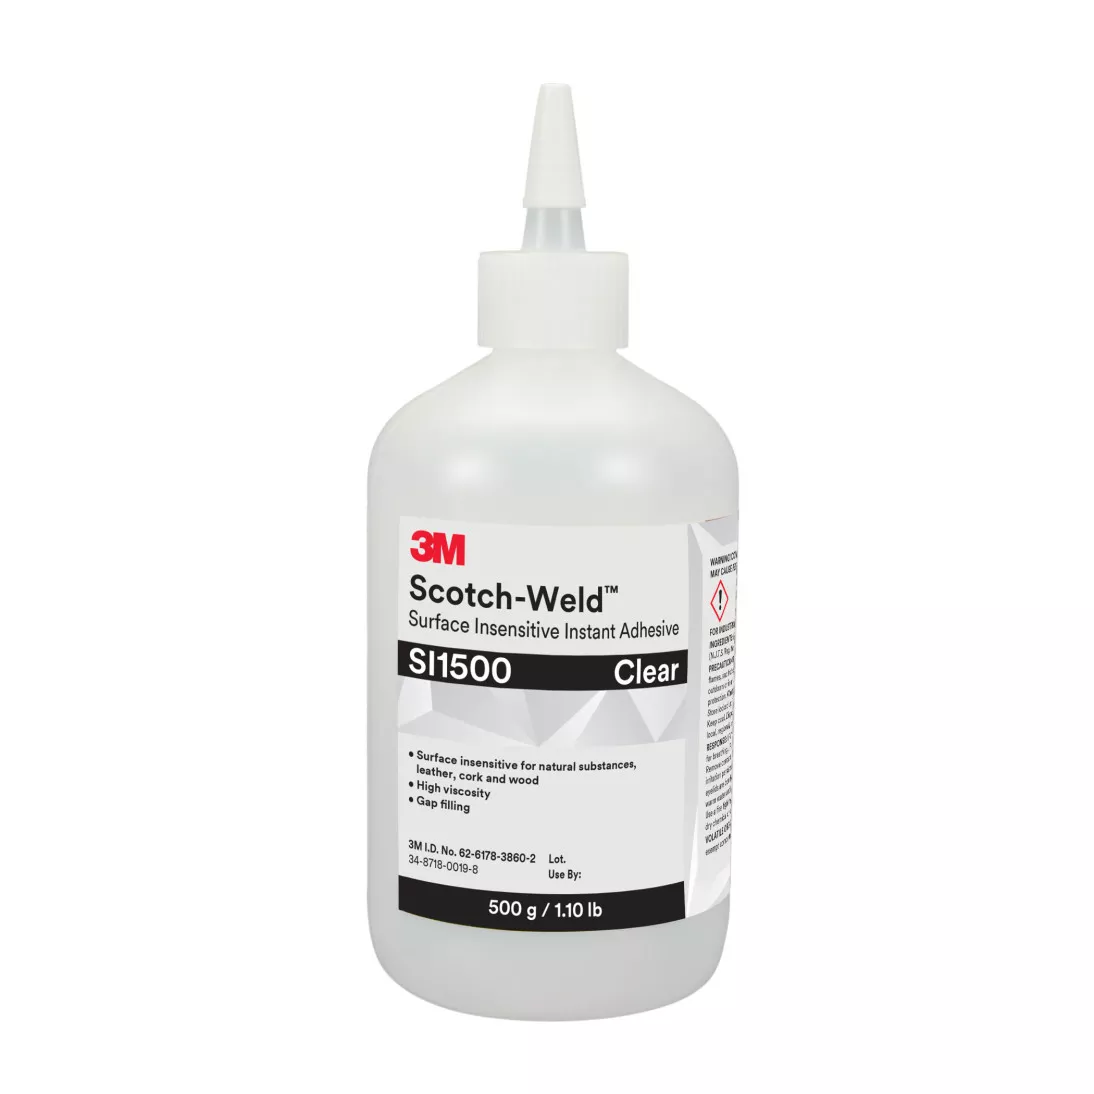 3M™ Scotch-Weld™ Surface Insensitive Instant Adhesive SI1500, Clear, 500
Gram Bottle, 1/case